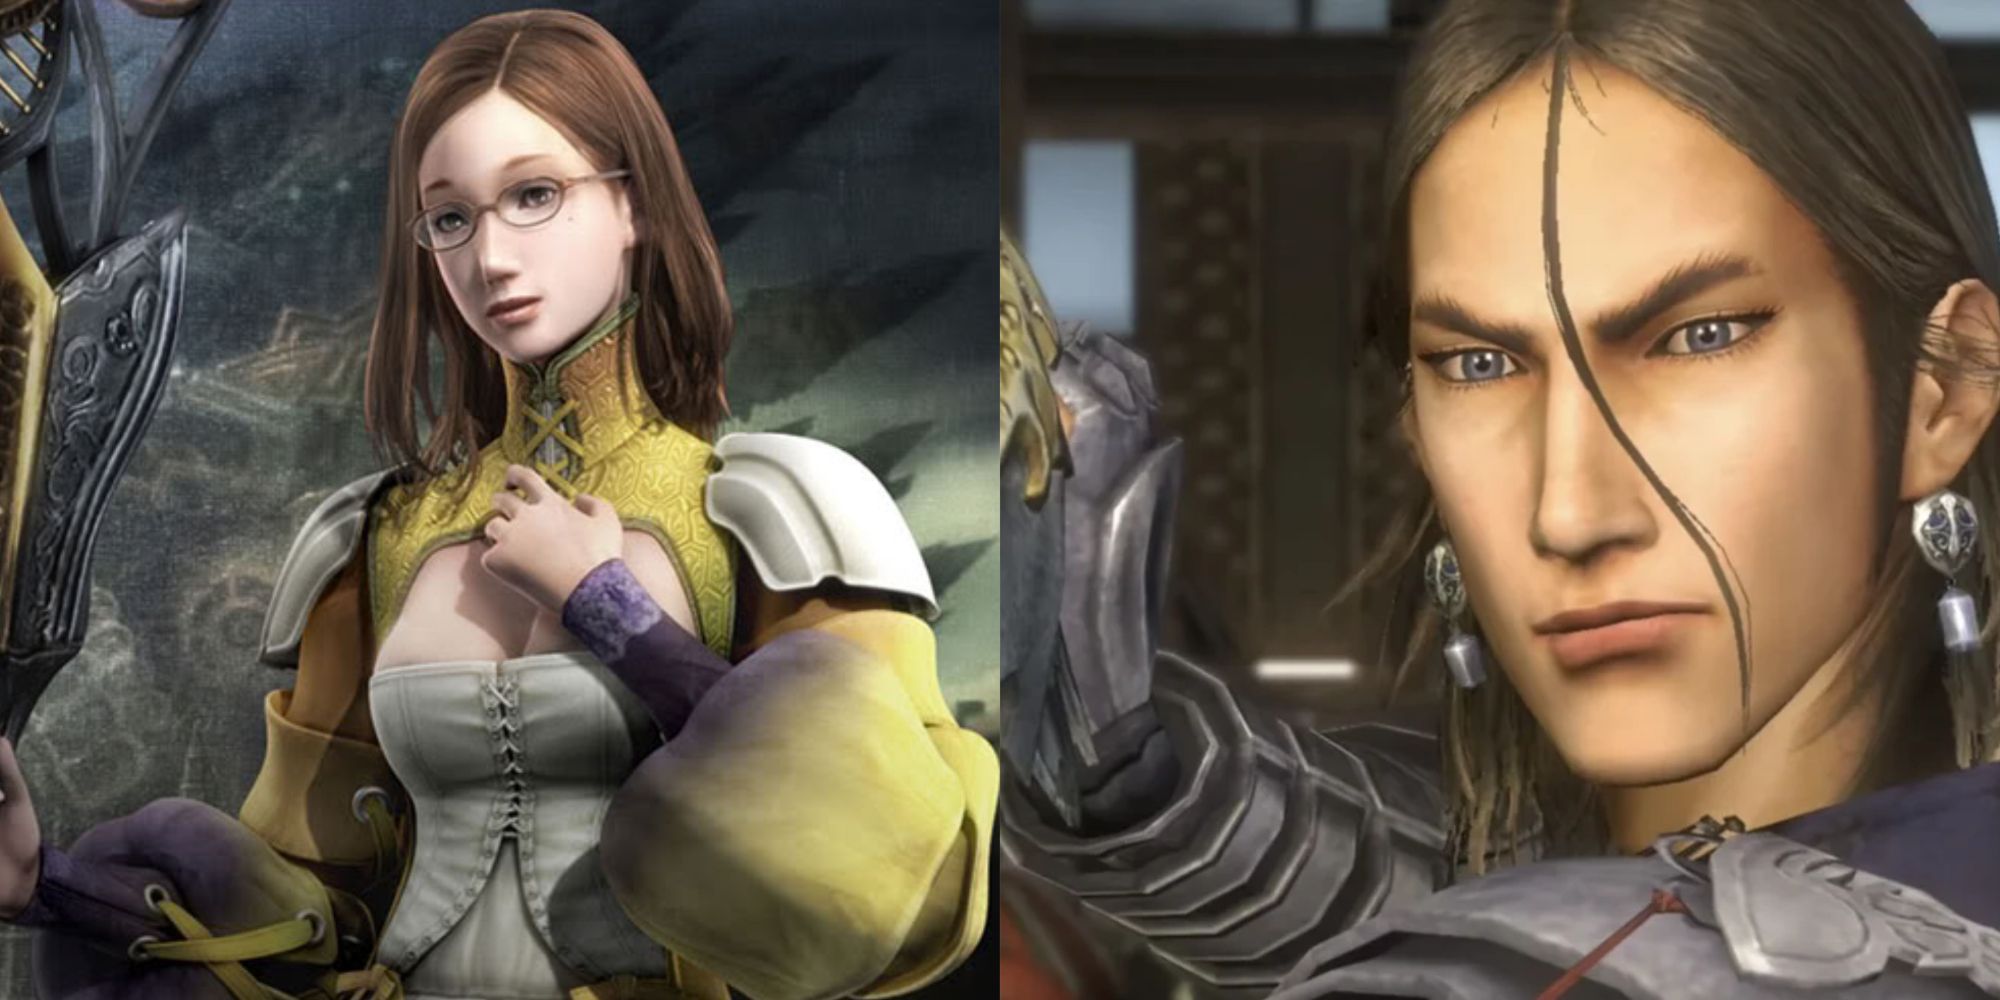 Characters from JRPG Lost Odyssey, Kaim and Sarah are two immortals who are also married